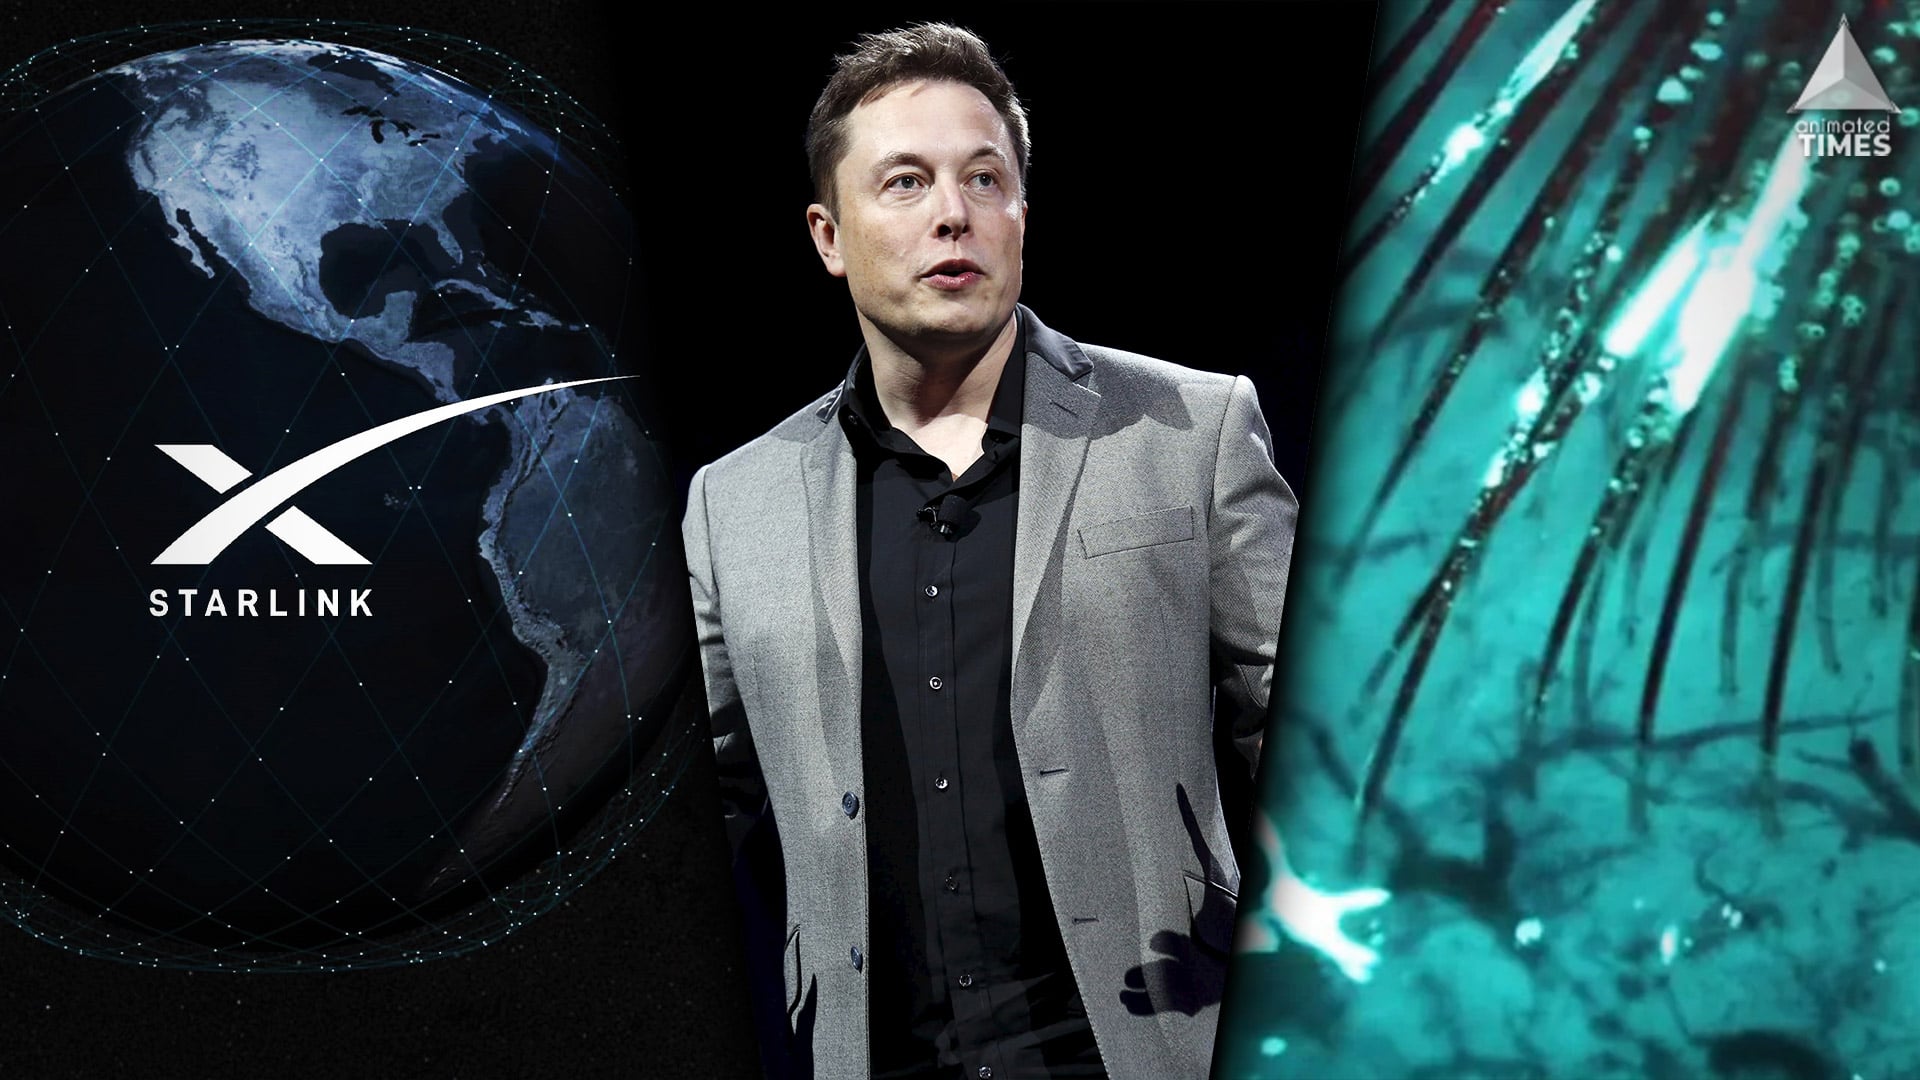 Every Upcoming (& Secret) Elon Musk Project All Set To Change The World By 2030